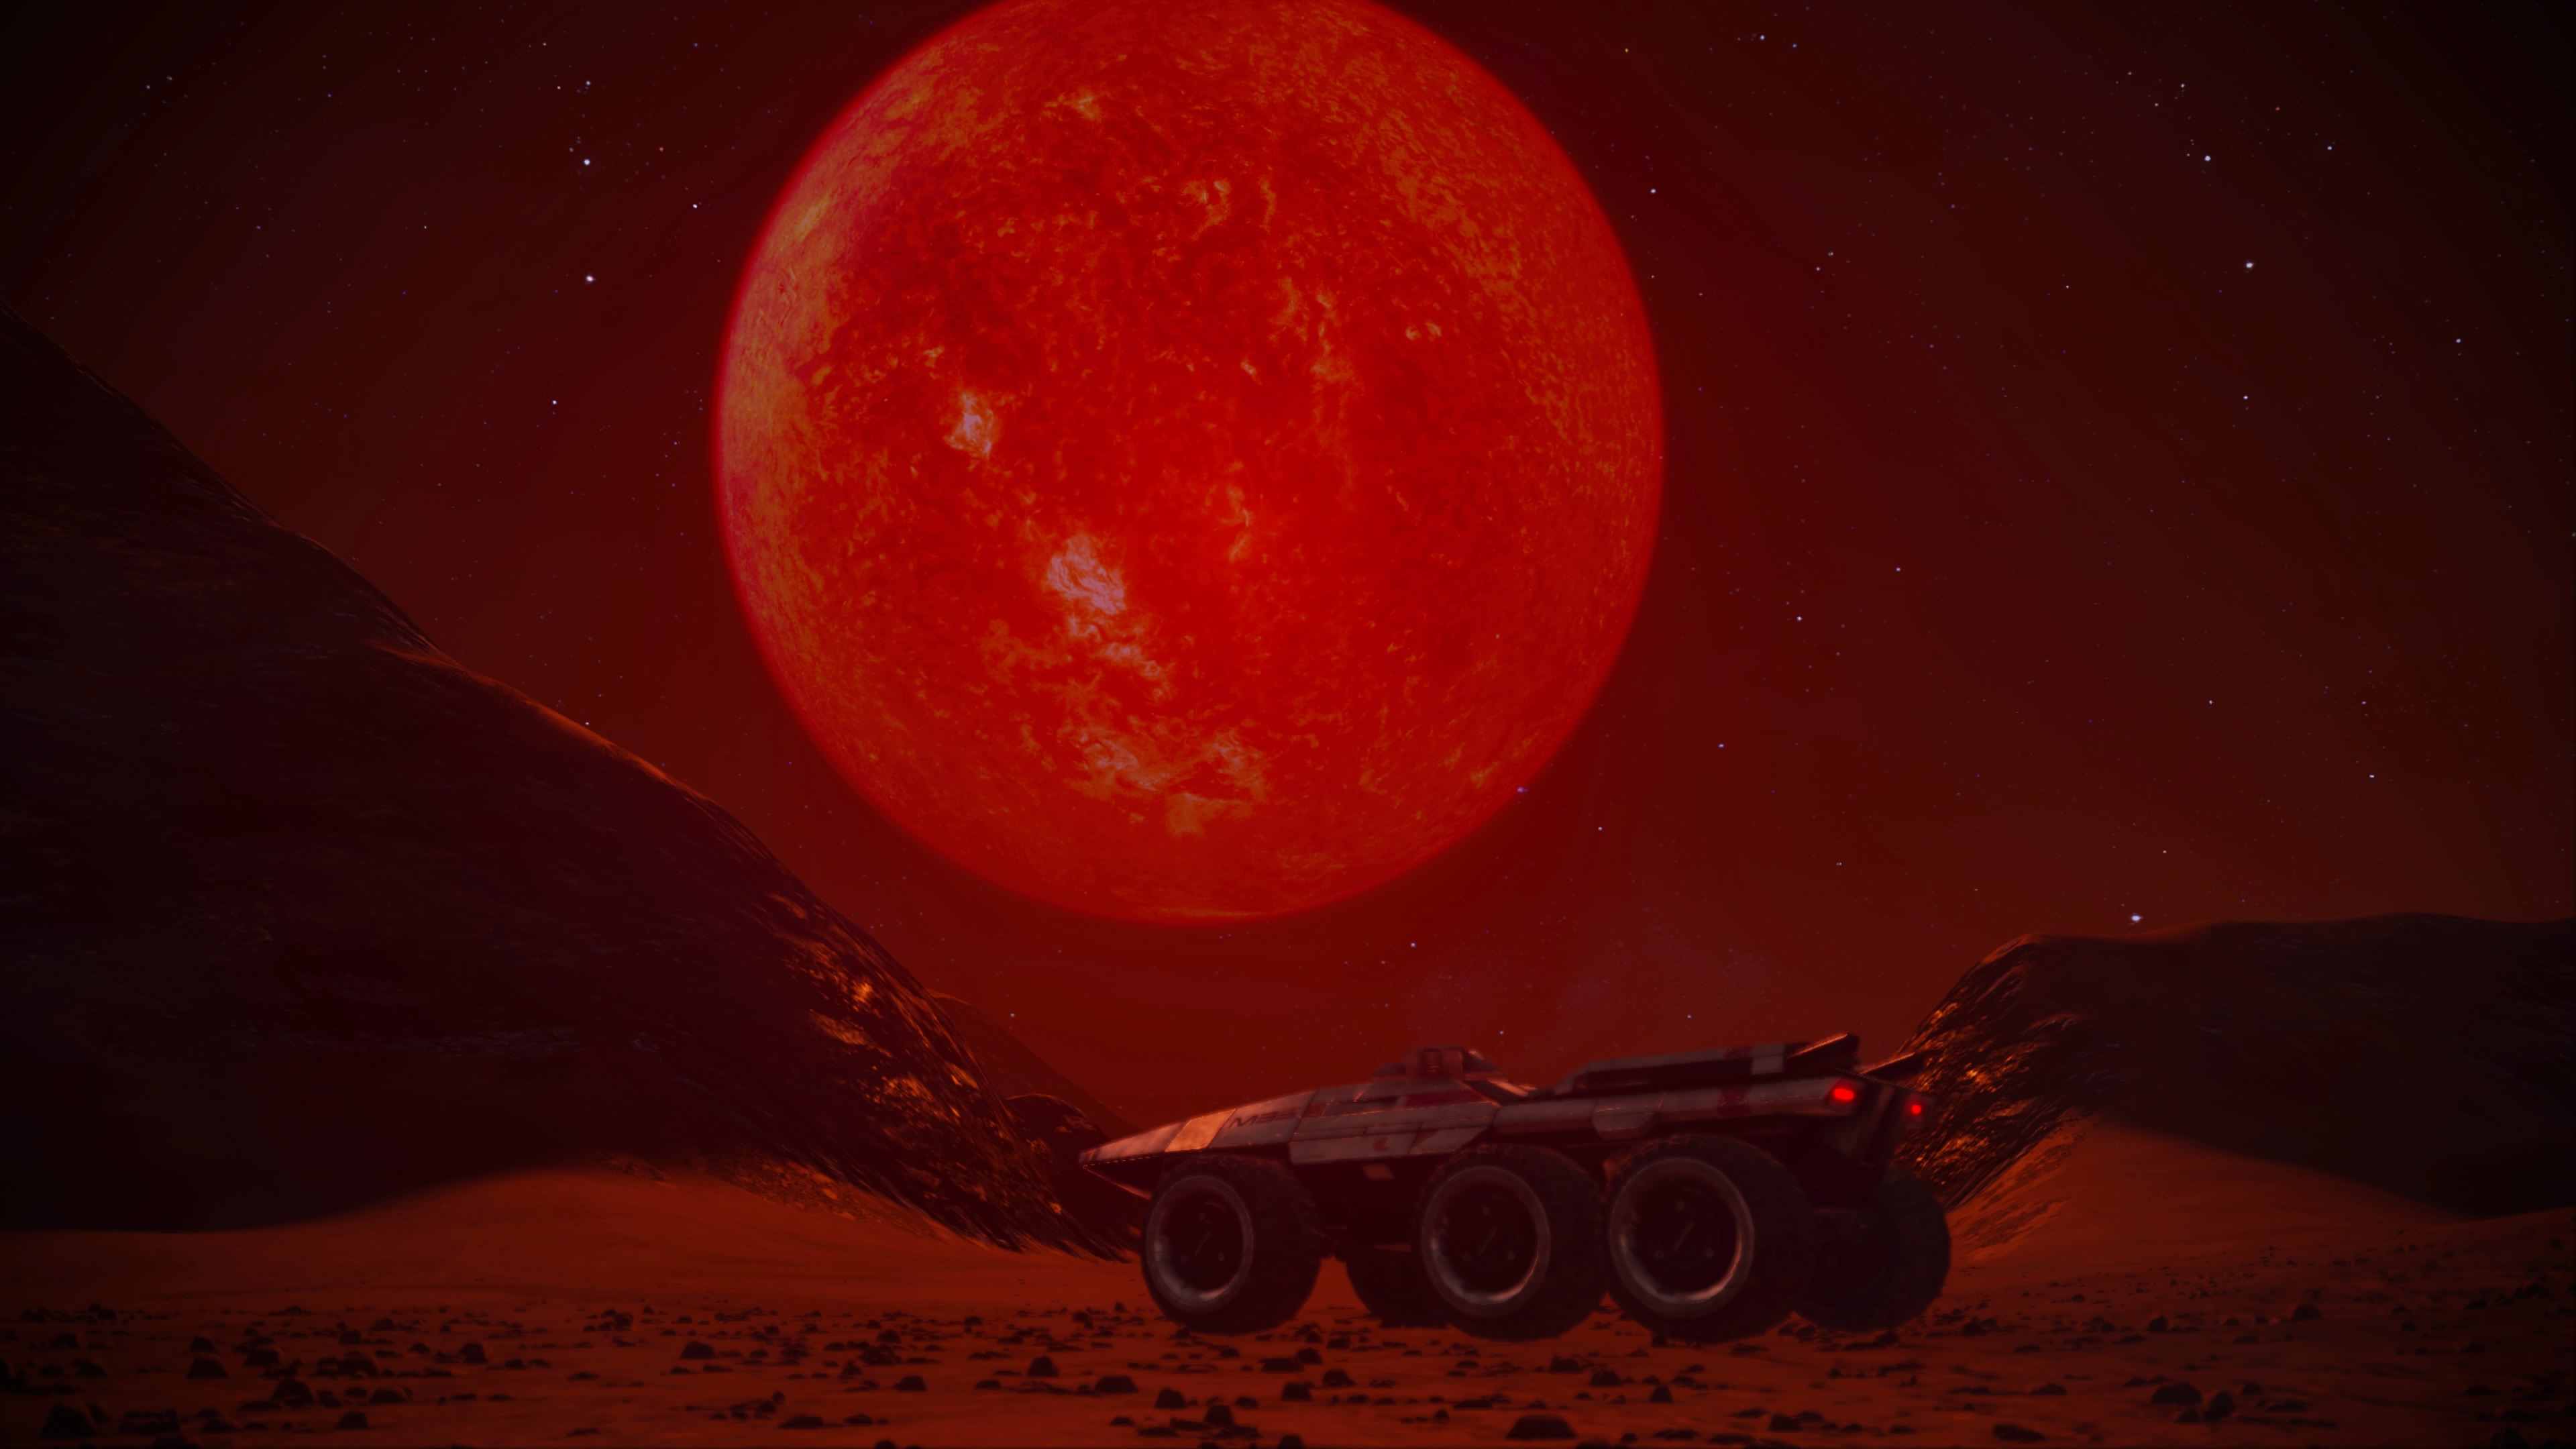 Exploring the remote planets of the galaxy will likely begin to grate as the novelty wears off despite some great opportunities for the new photo mode